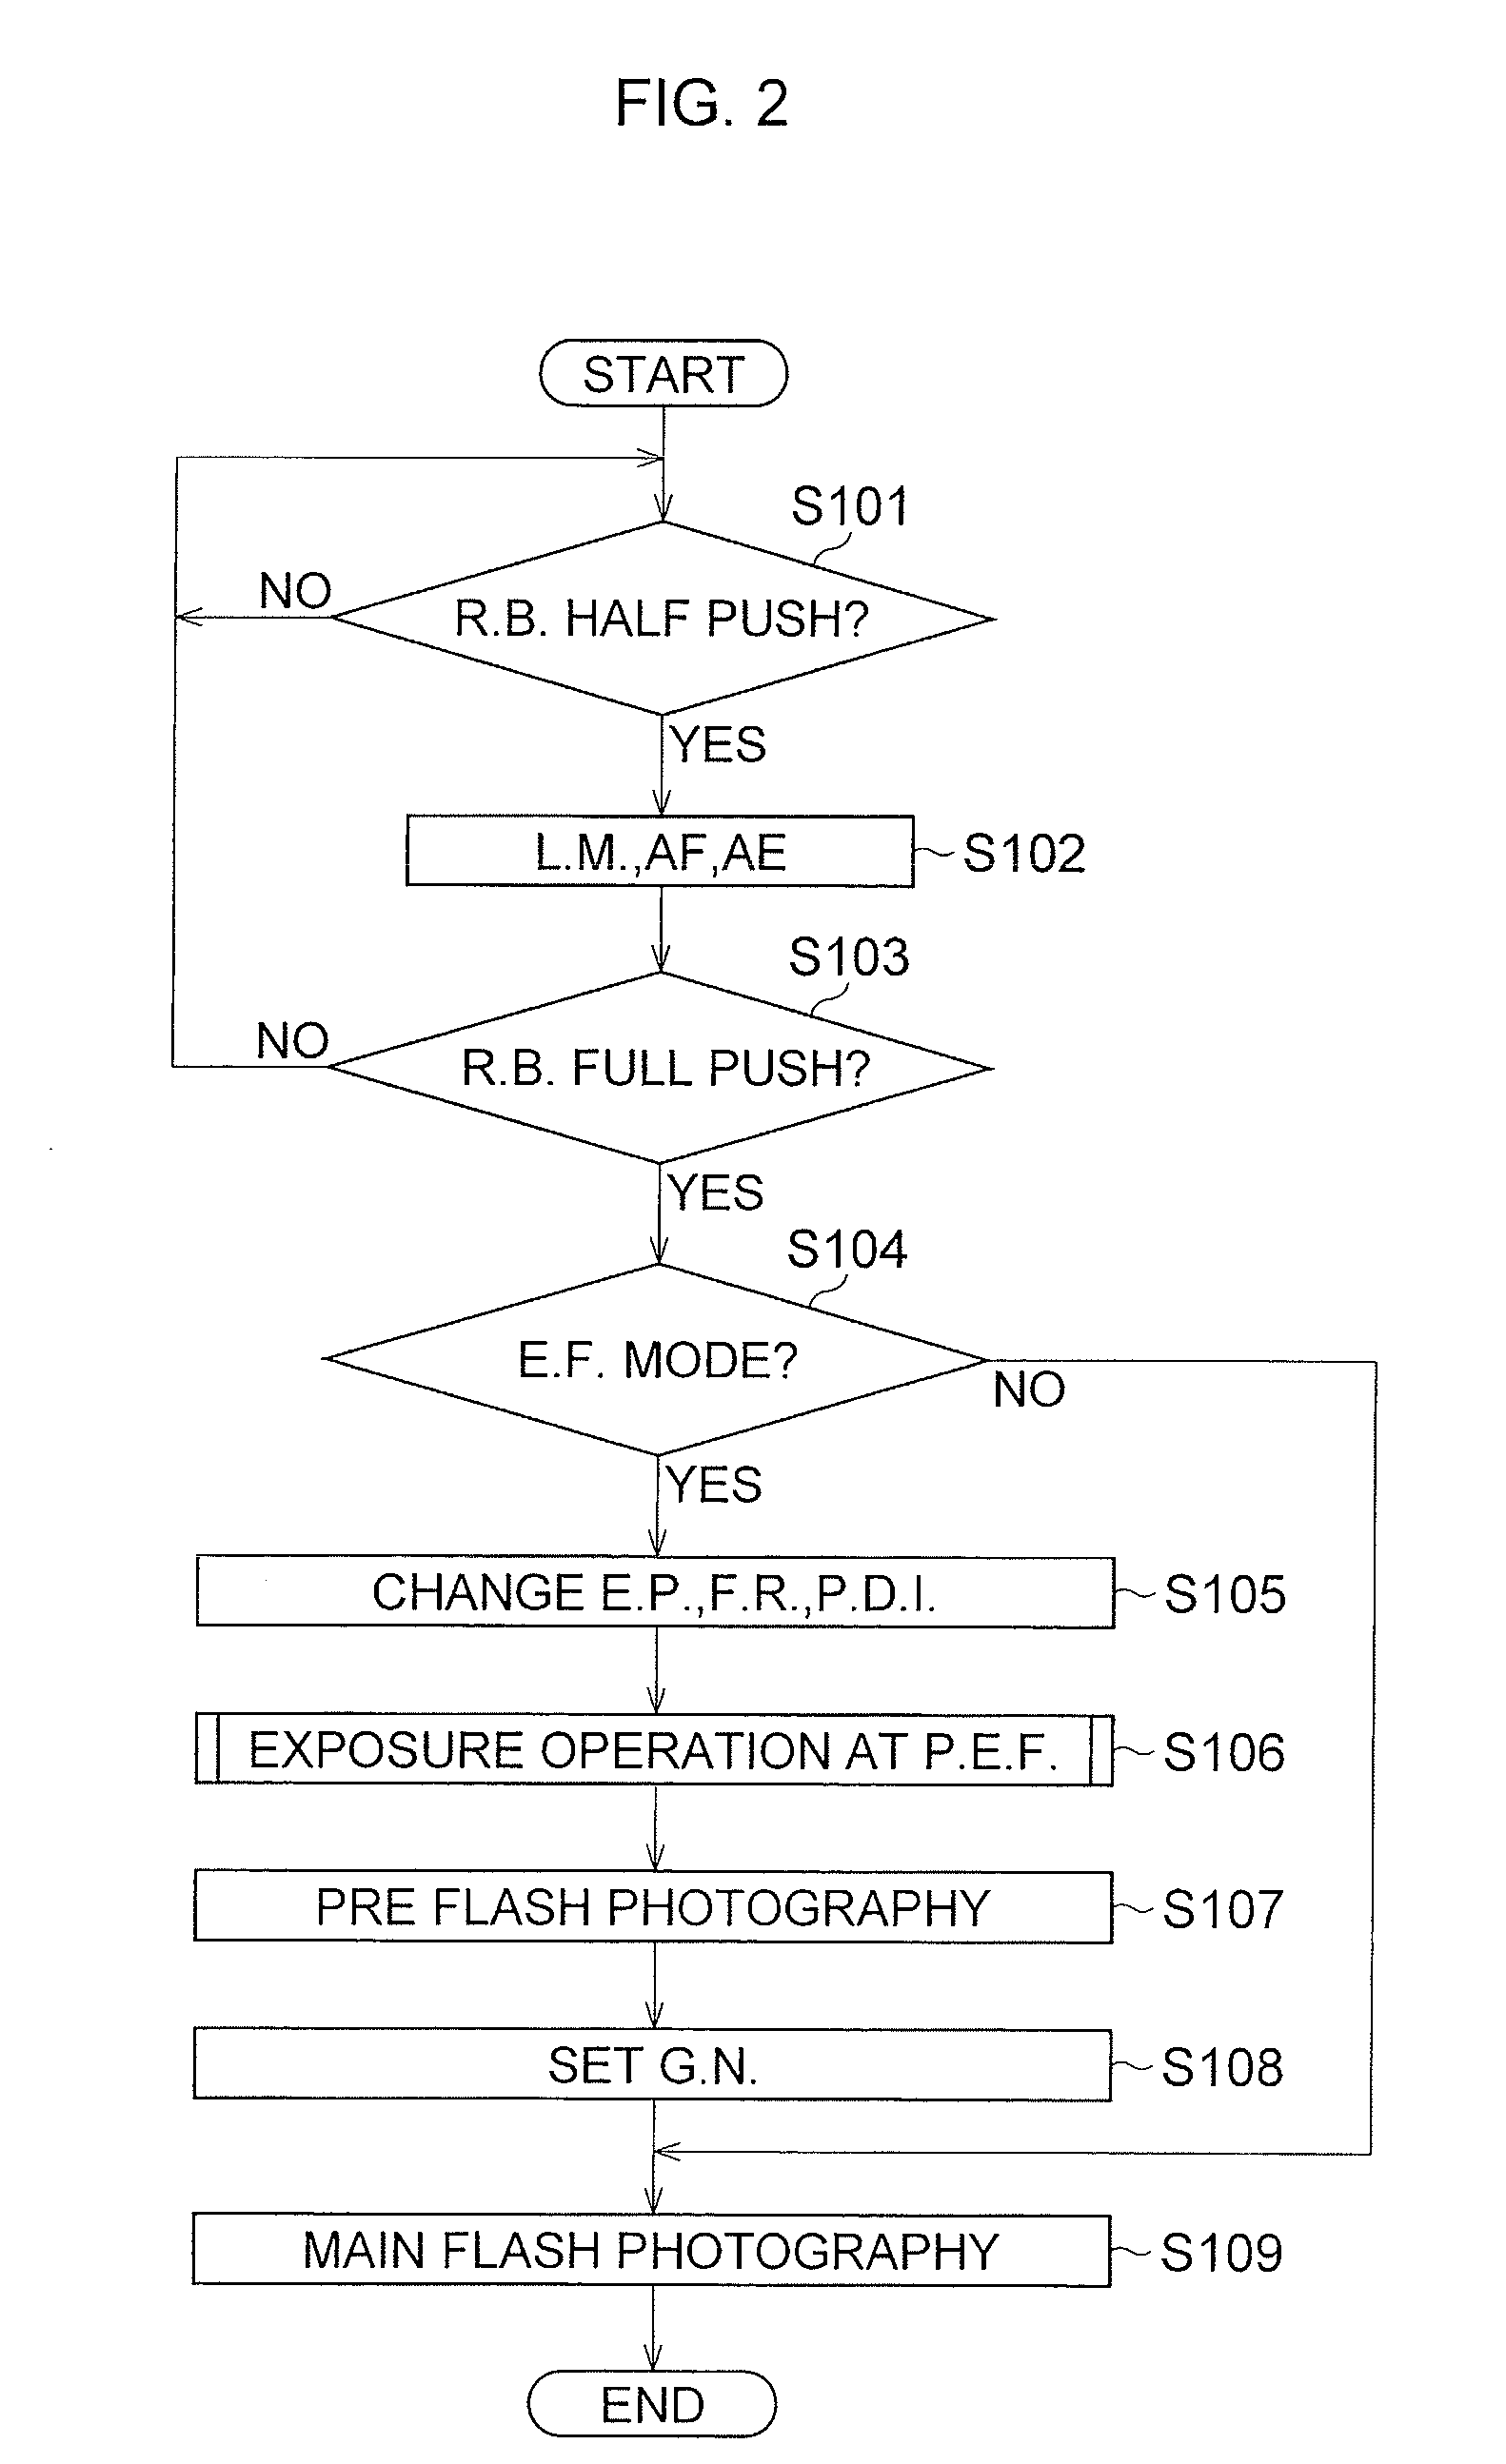 Apparatus for photographing by using electronic flash